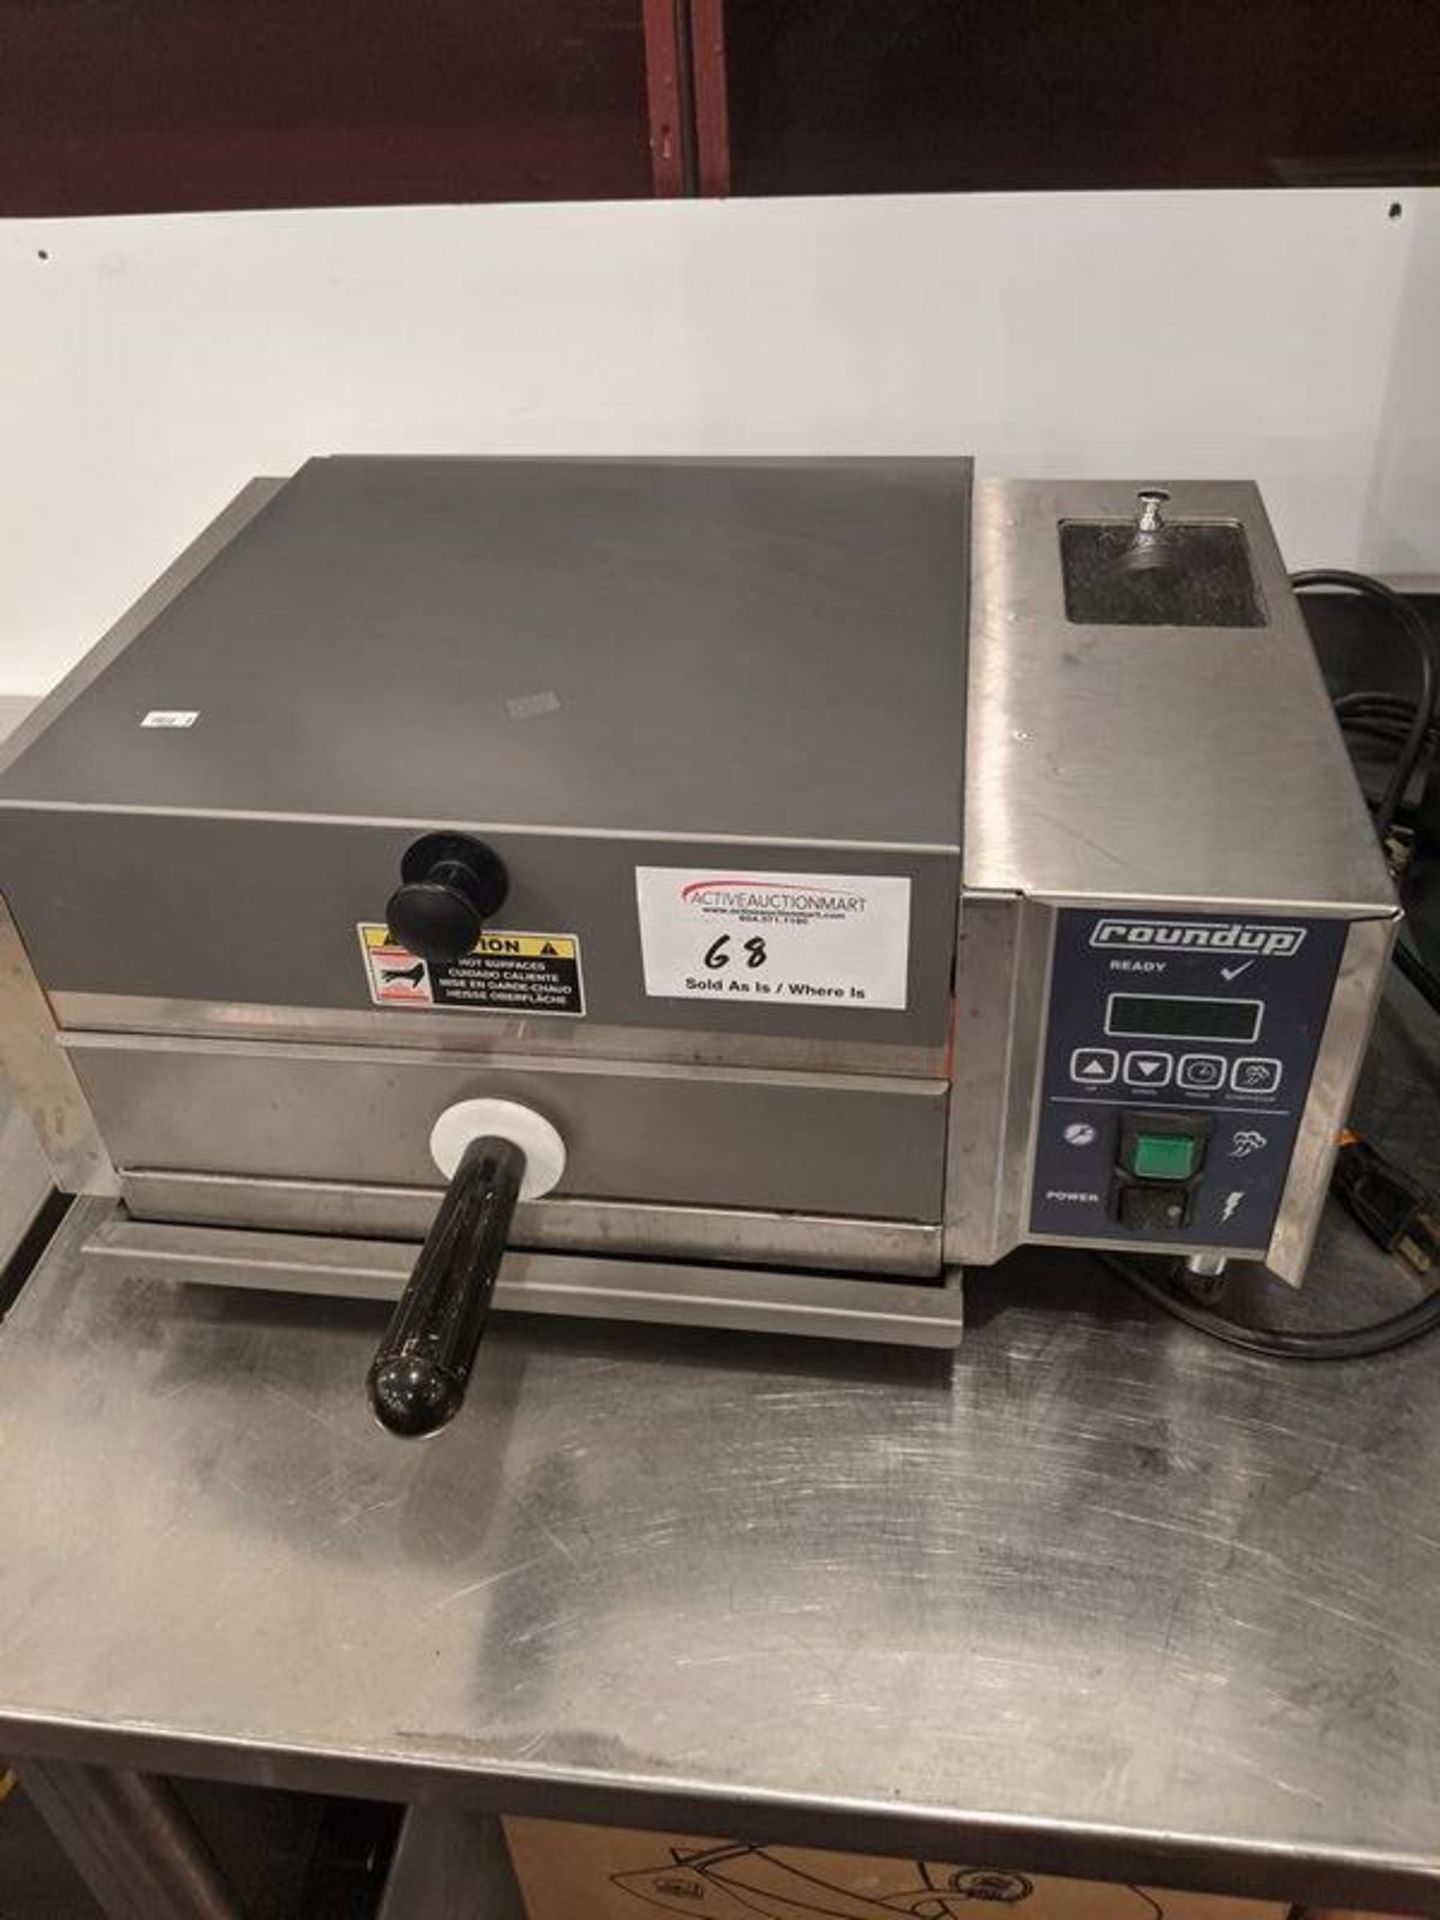 Roundup Counter Top Steamer Model M5-140CD